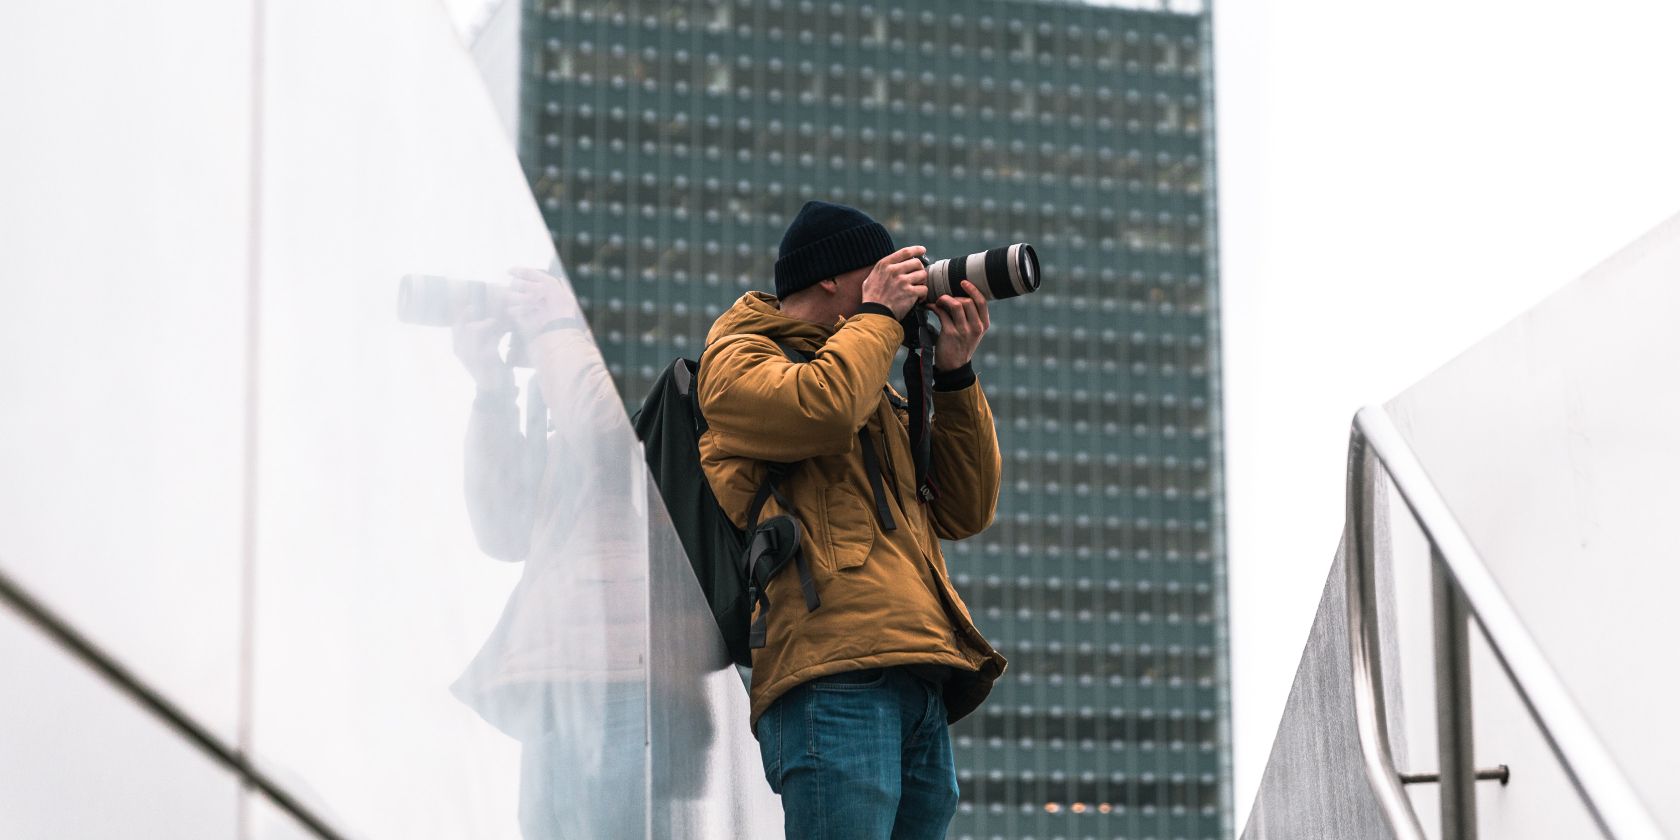 Photo of a person taking pictures in a city